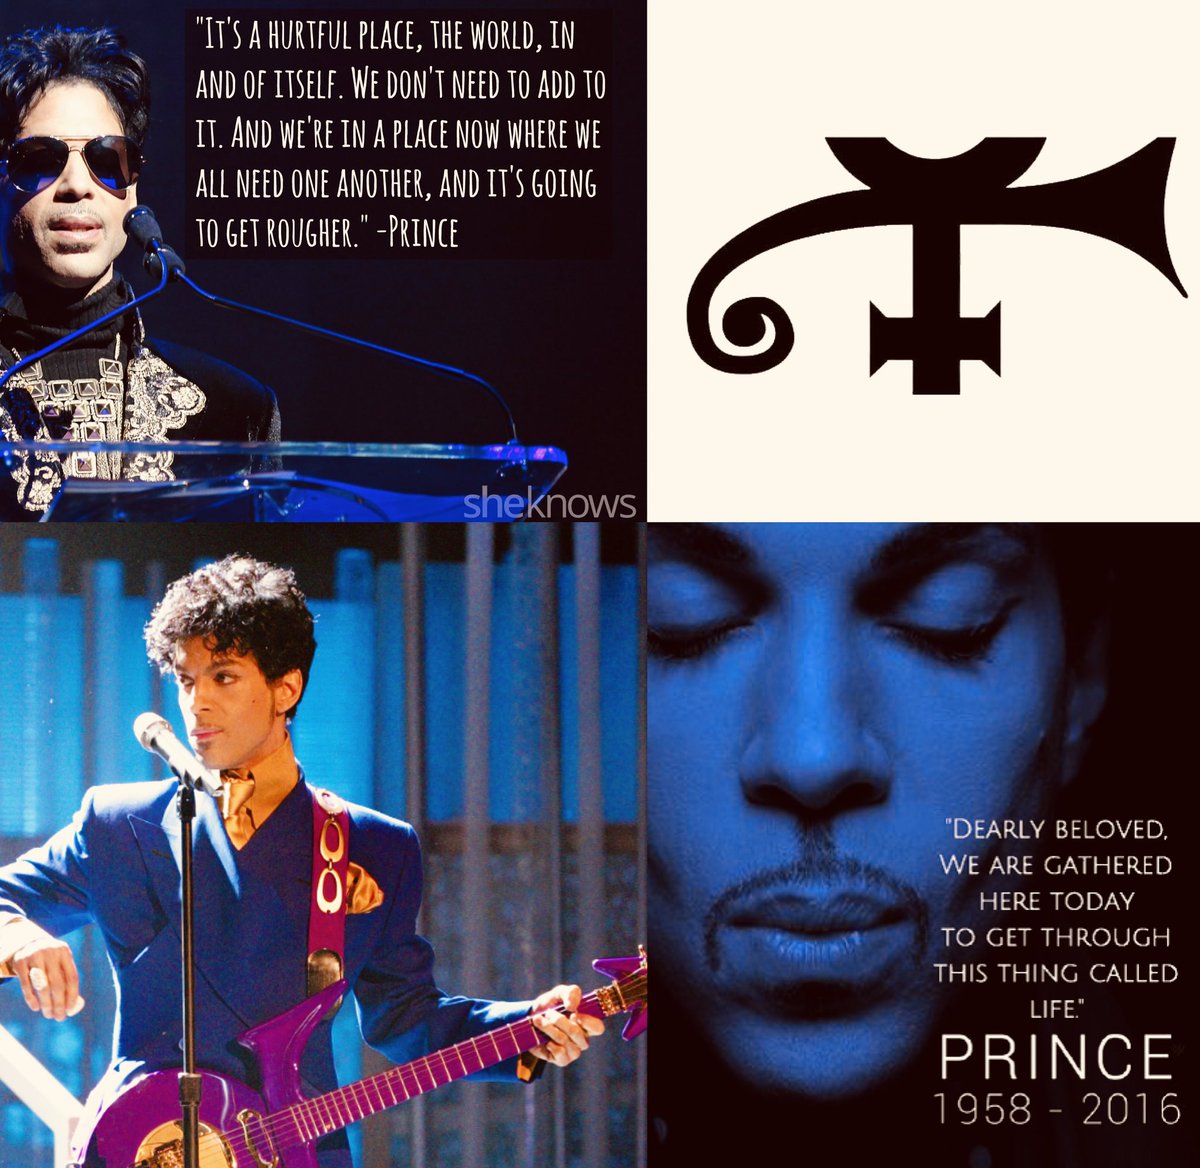 “Rave Unto the Joy Fantastic”

❤️ Watch this 1999 “#Prince” interview with your 2024 Eyes. Hear between the lines; the Peace, Serenity, Strength, Humility, Joy, Depth, Brilliance, Clarity & Wisdom.

What was he truly saying? What would he say today? From where was he speaking?…